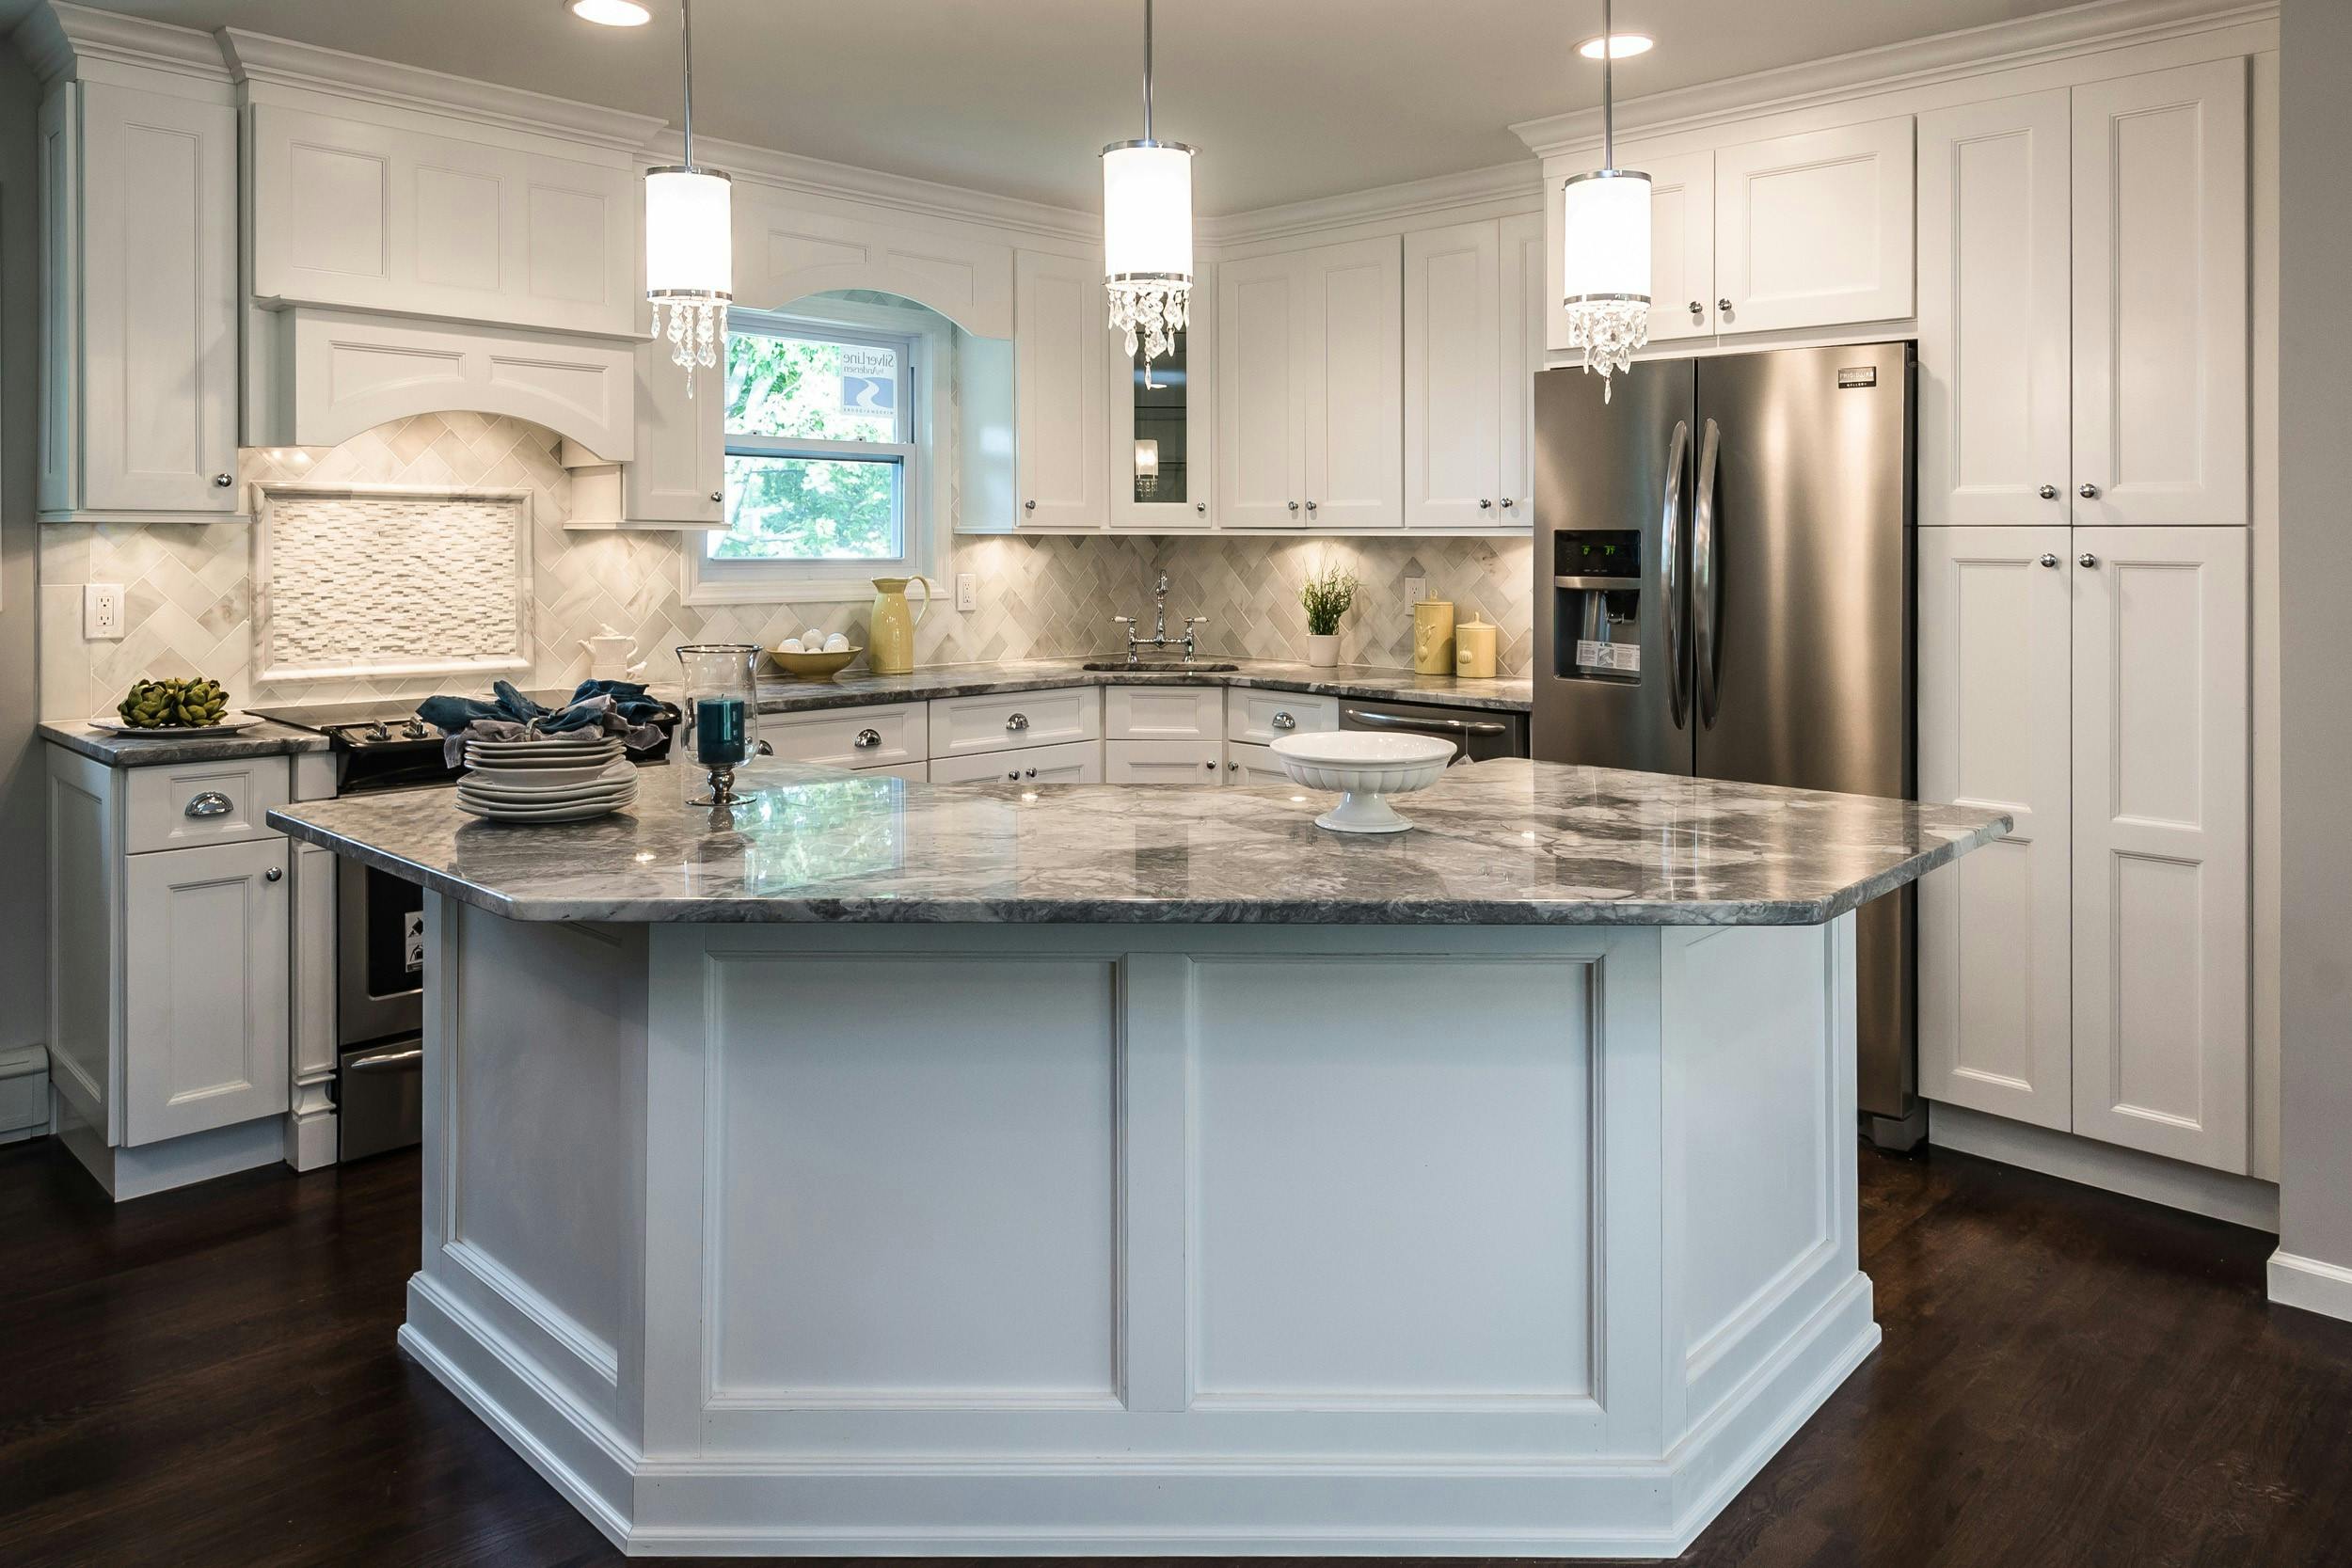 Kitchen Countertops And Cabinets, What Color Cabinets Look Good With Black Granite Countertops